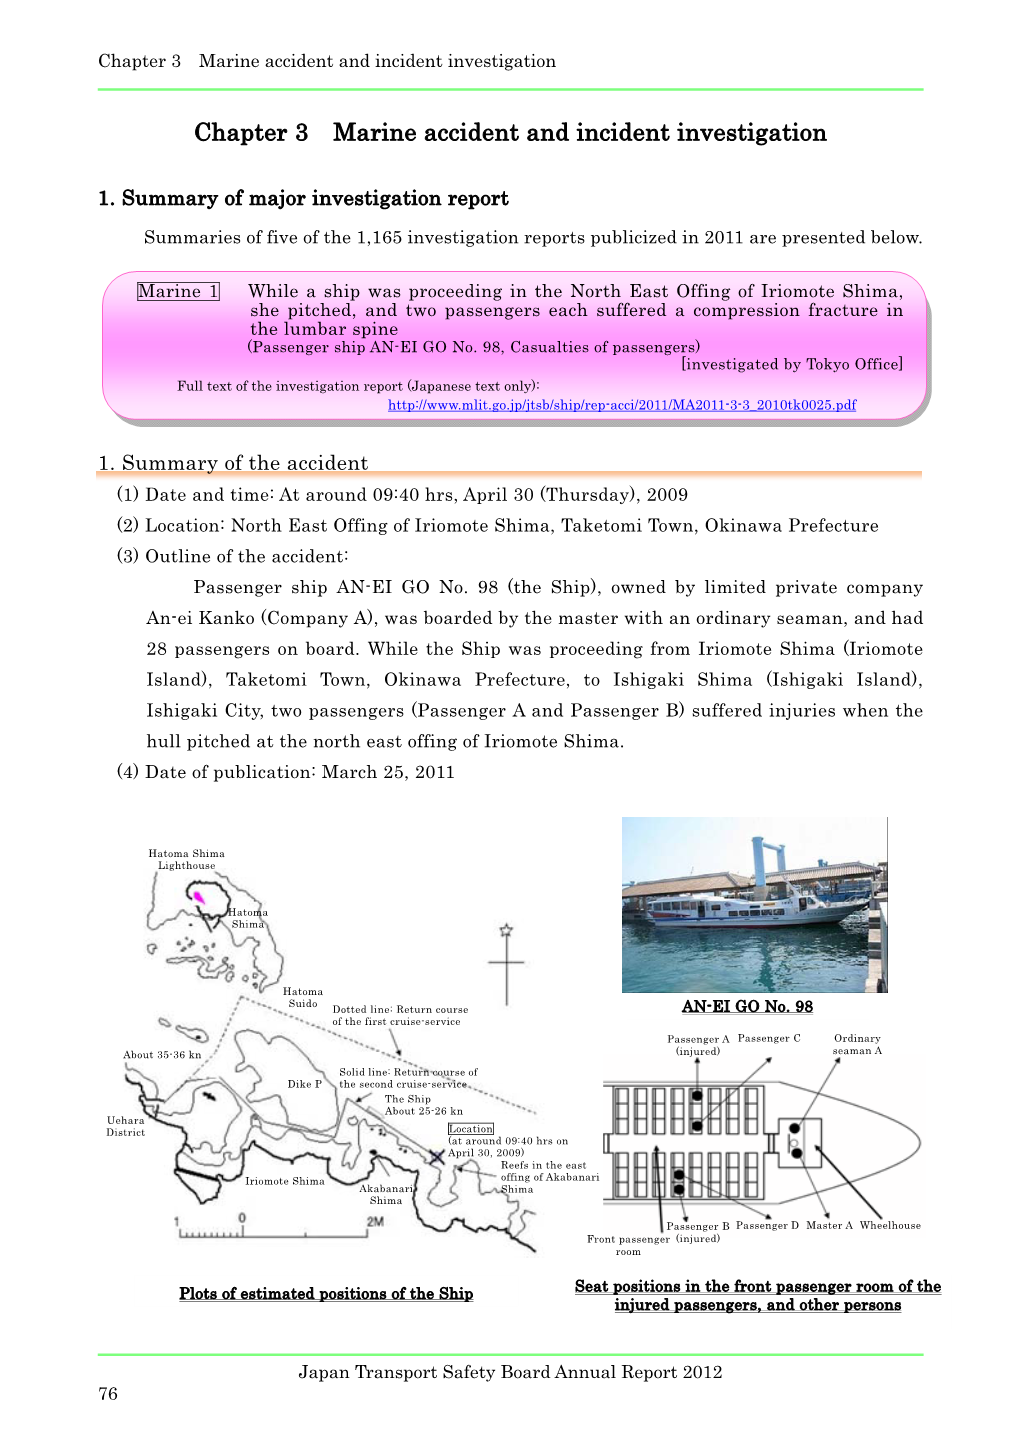 Chapter 3 Marine Accident and Incident Investigation